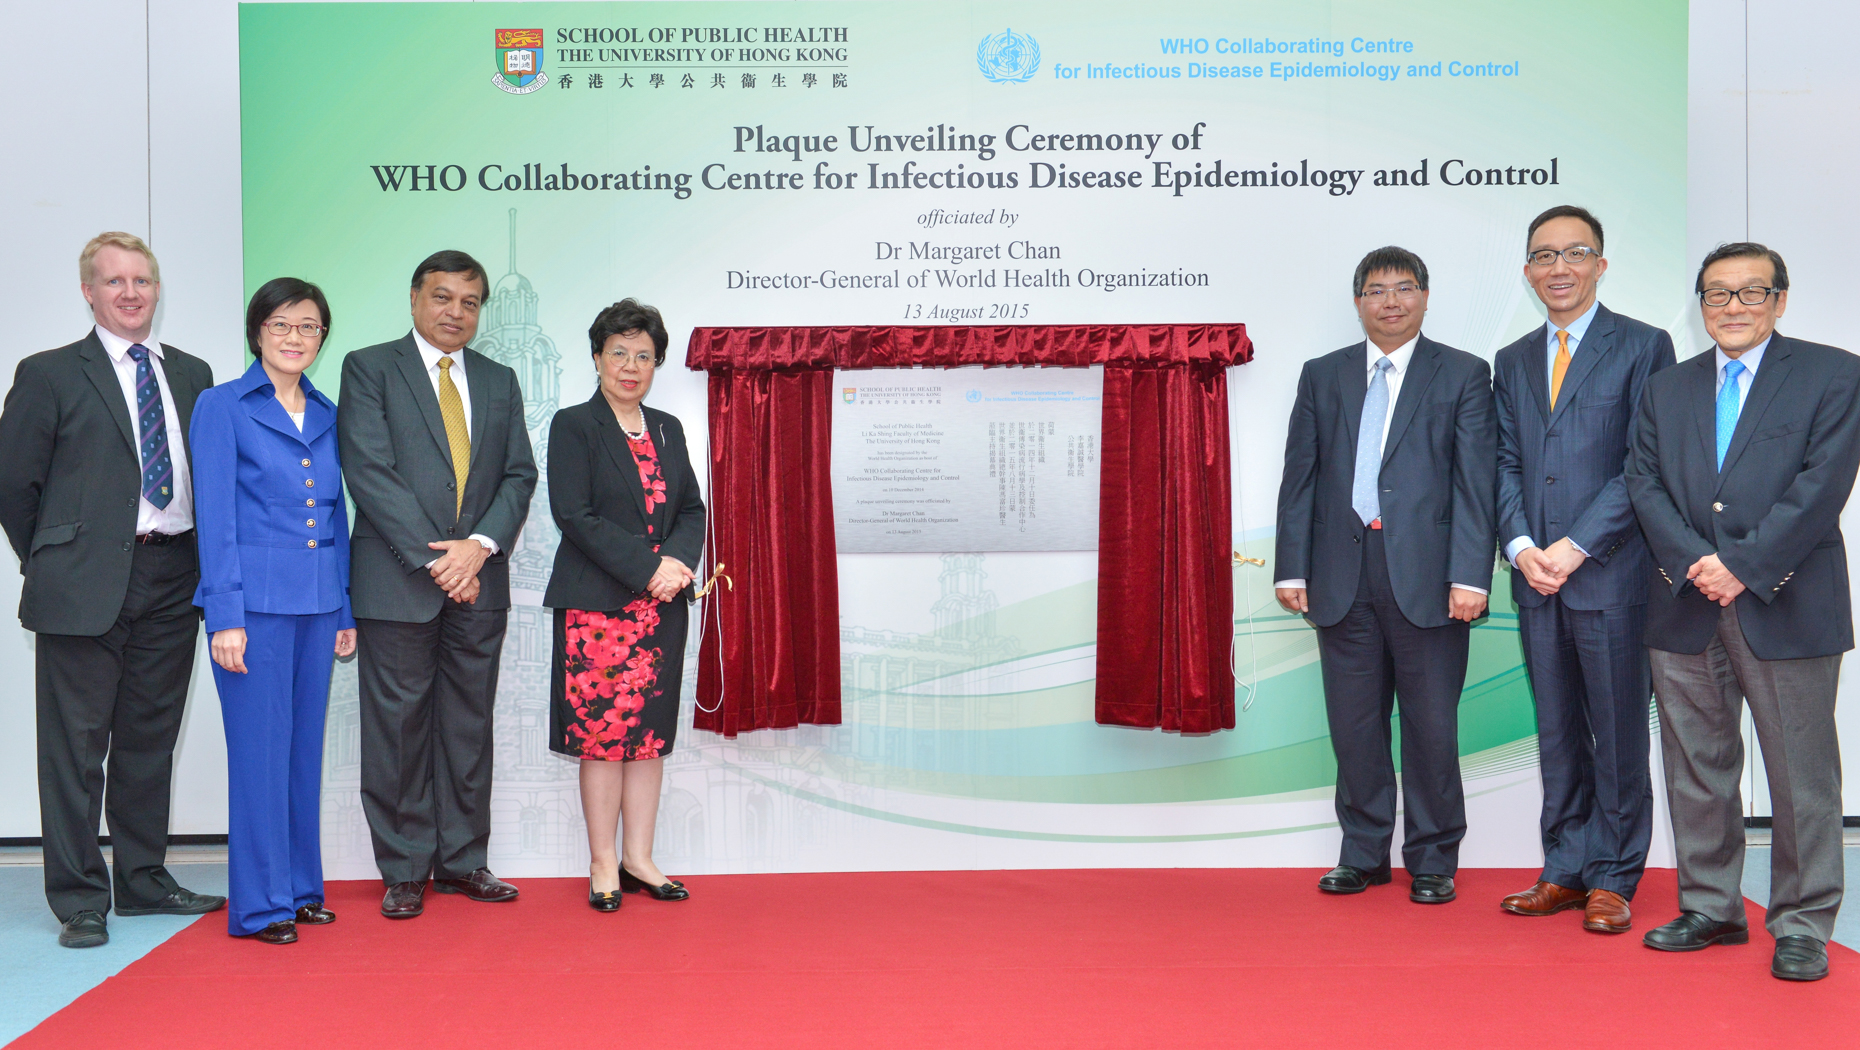 The School of Public Health is designated a World Health Organization Collaborating Centre for Infectious Disease Epidemiology and Control